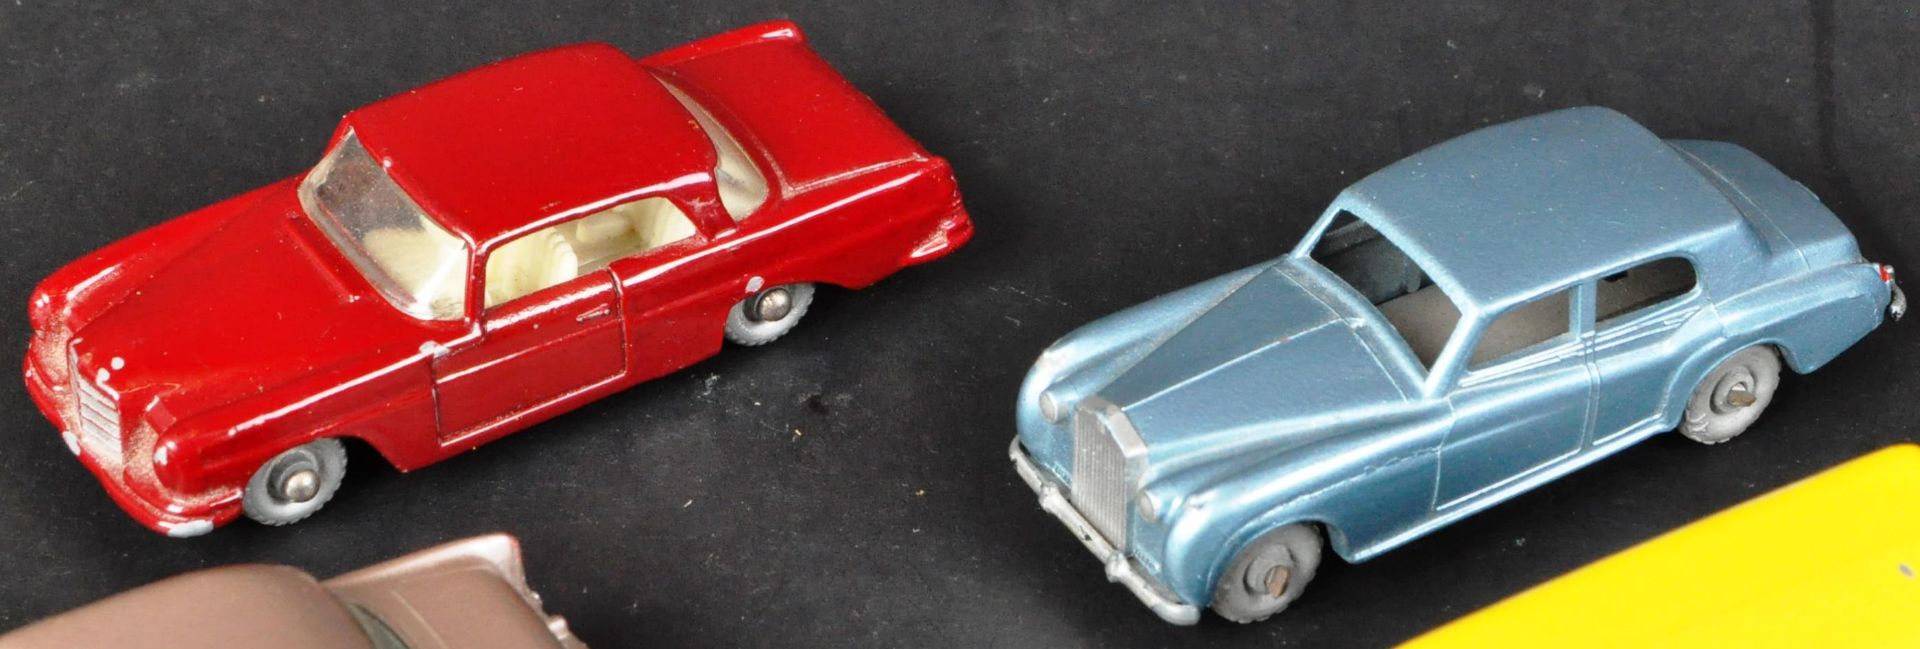 COLLECTION OF X6 VINTAGE MATCHBOX LESNEY DIECAST MODELS - Image 2 of 5